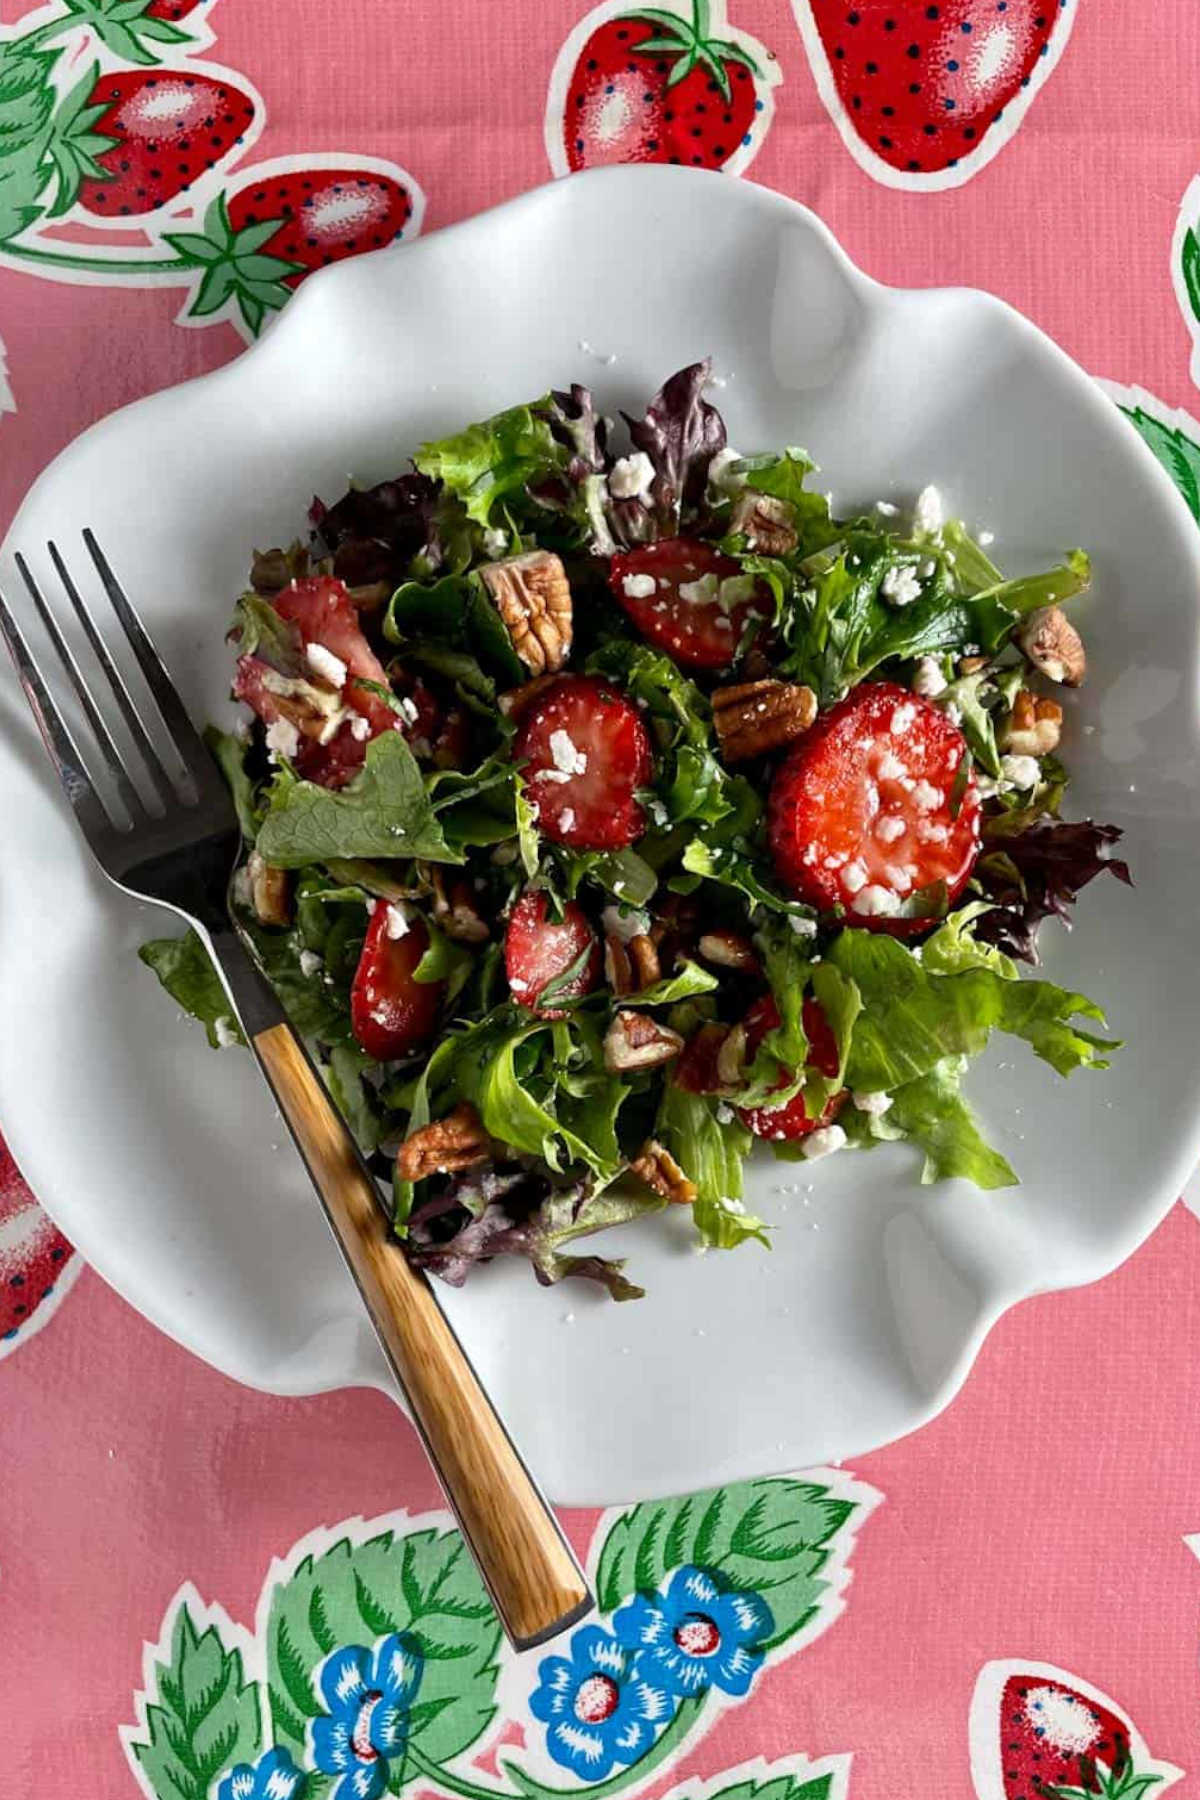 A plate of strawberry salad with a fork.